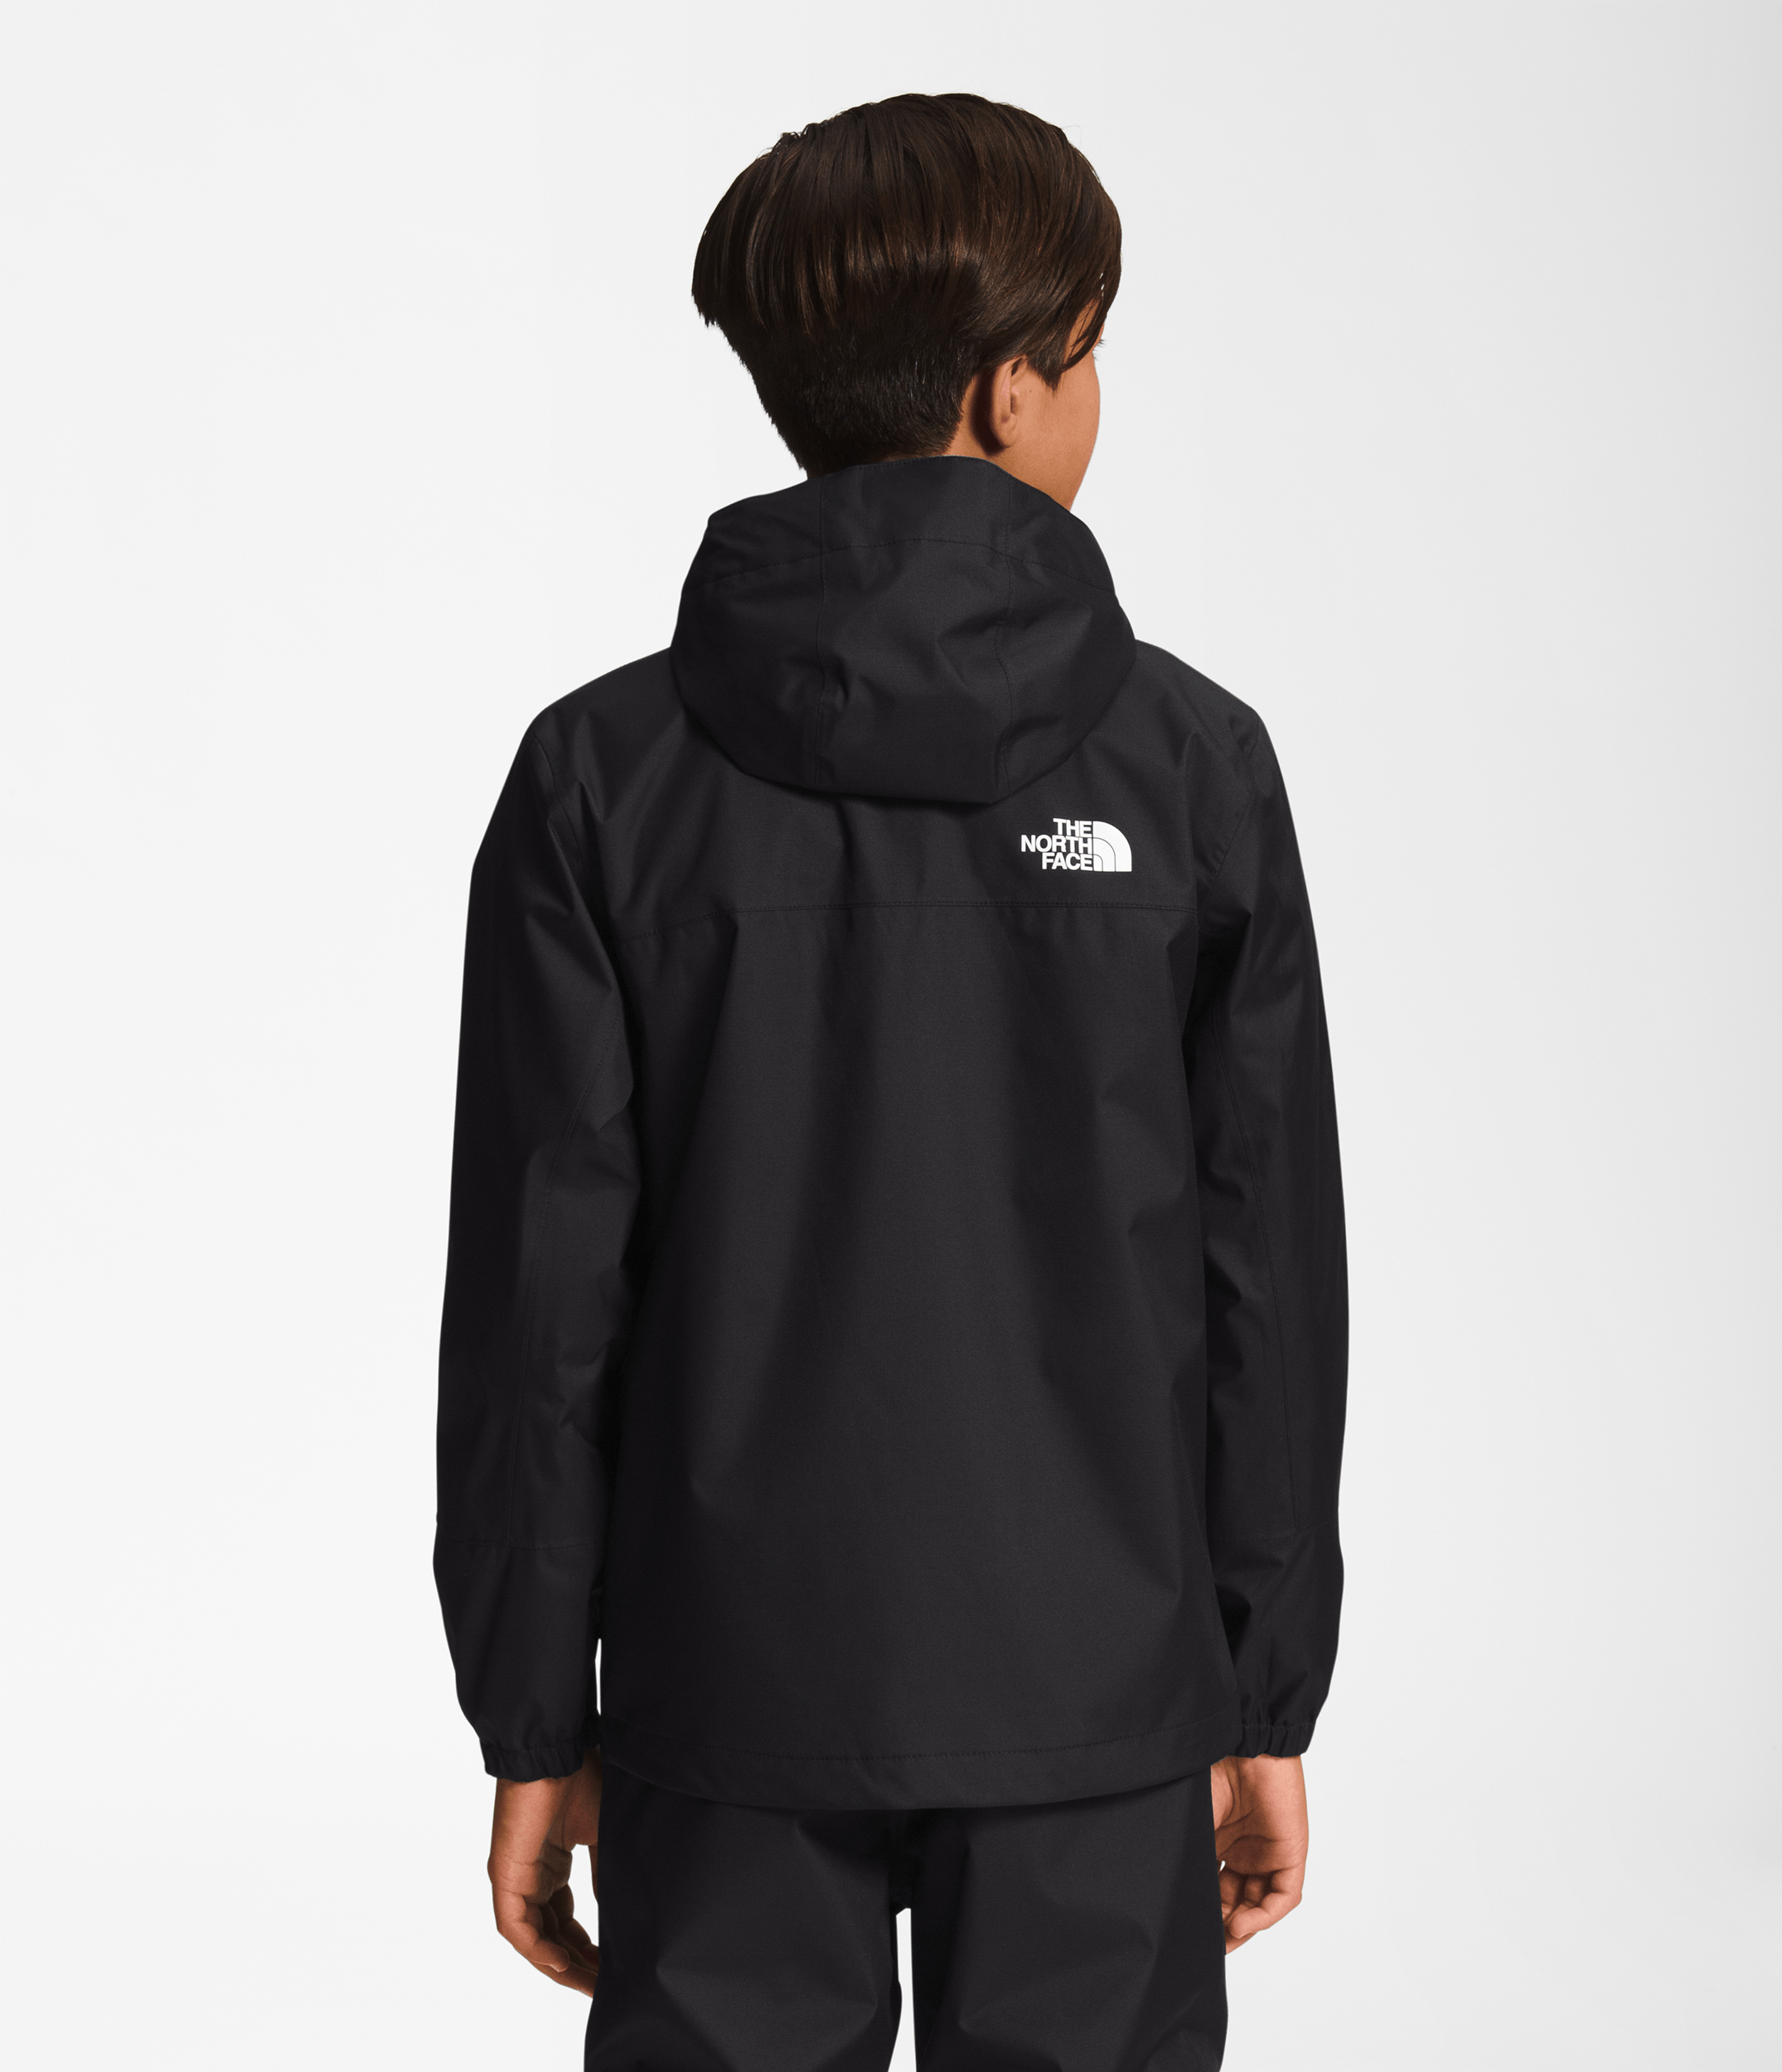 The North Face Boys' Antora Rain Jacket - Mountain Kids Outfitters